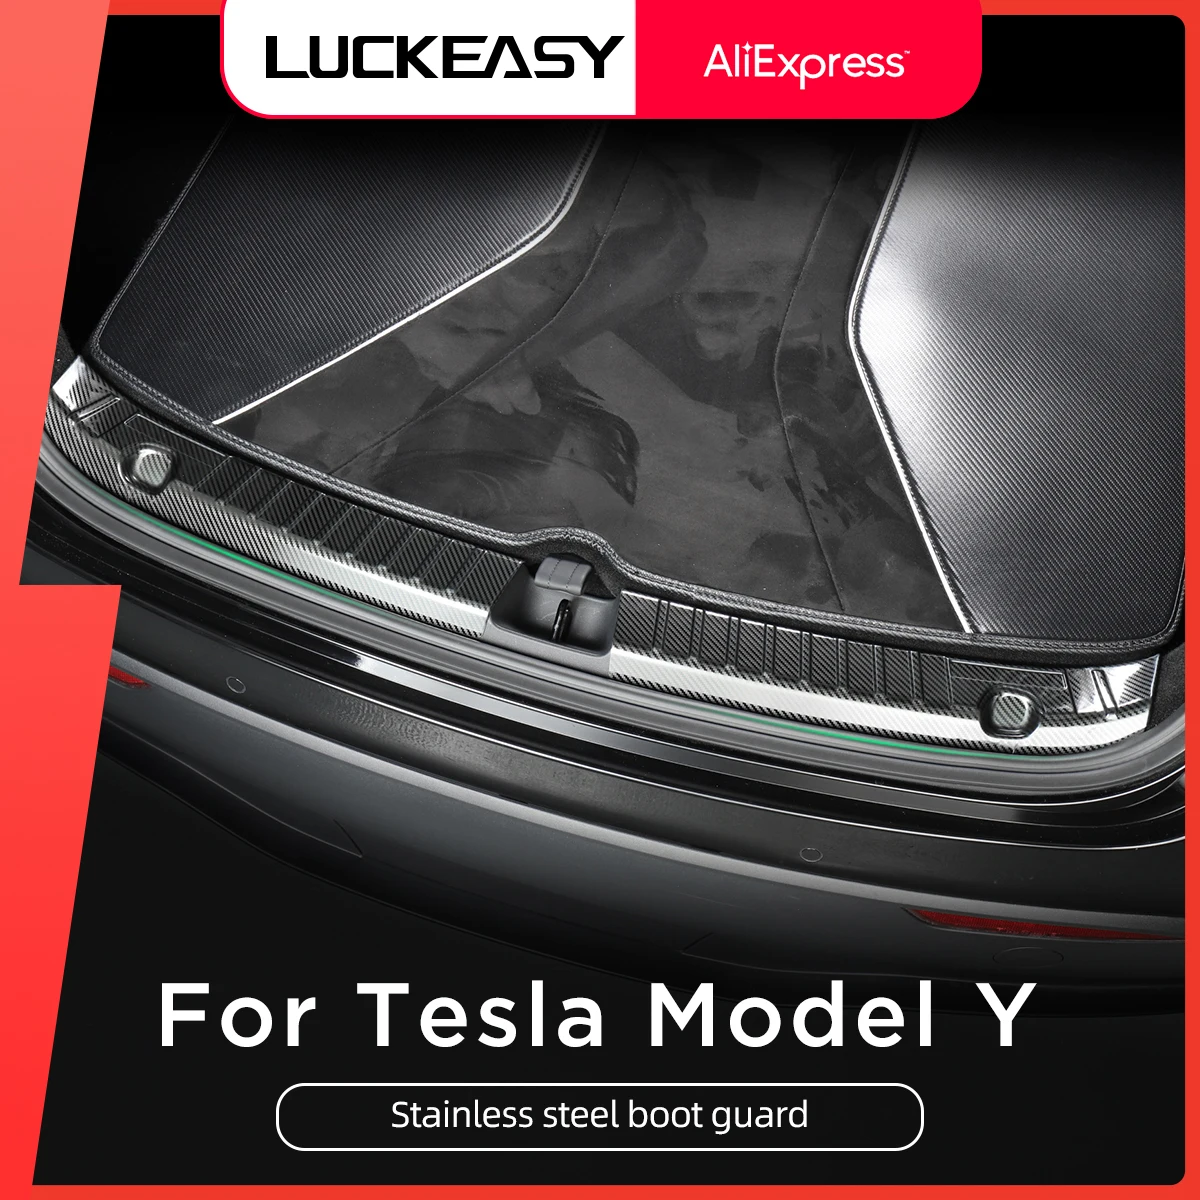 LUCKEASY Stainless Steel Trunk Inner Guard For Tesla Model Y 2020-2022 Car Inner Rear Bumper Guard Plate Cover Trim Accessories